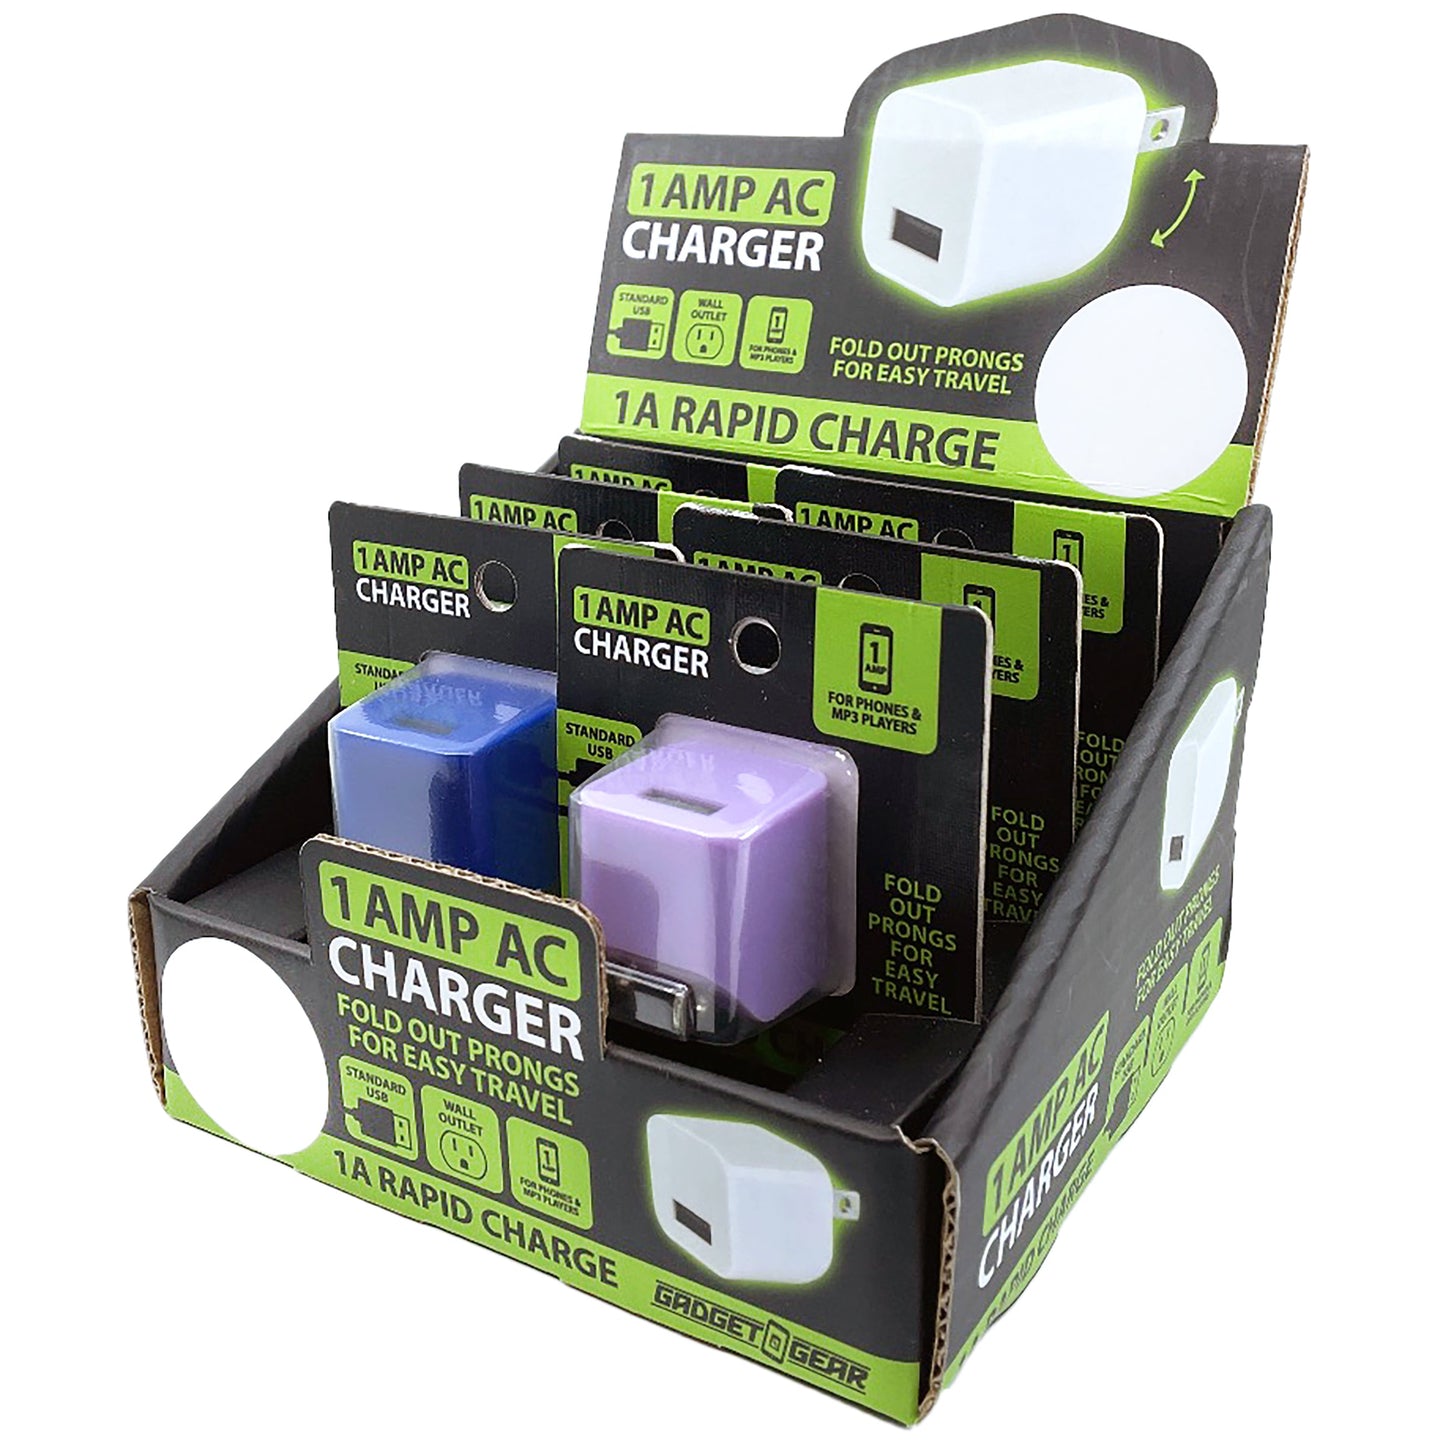 ITEM NUMBER 022853 1A AC CHARGER 6 PIECES PER DISPLAY